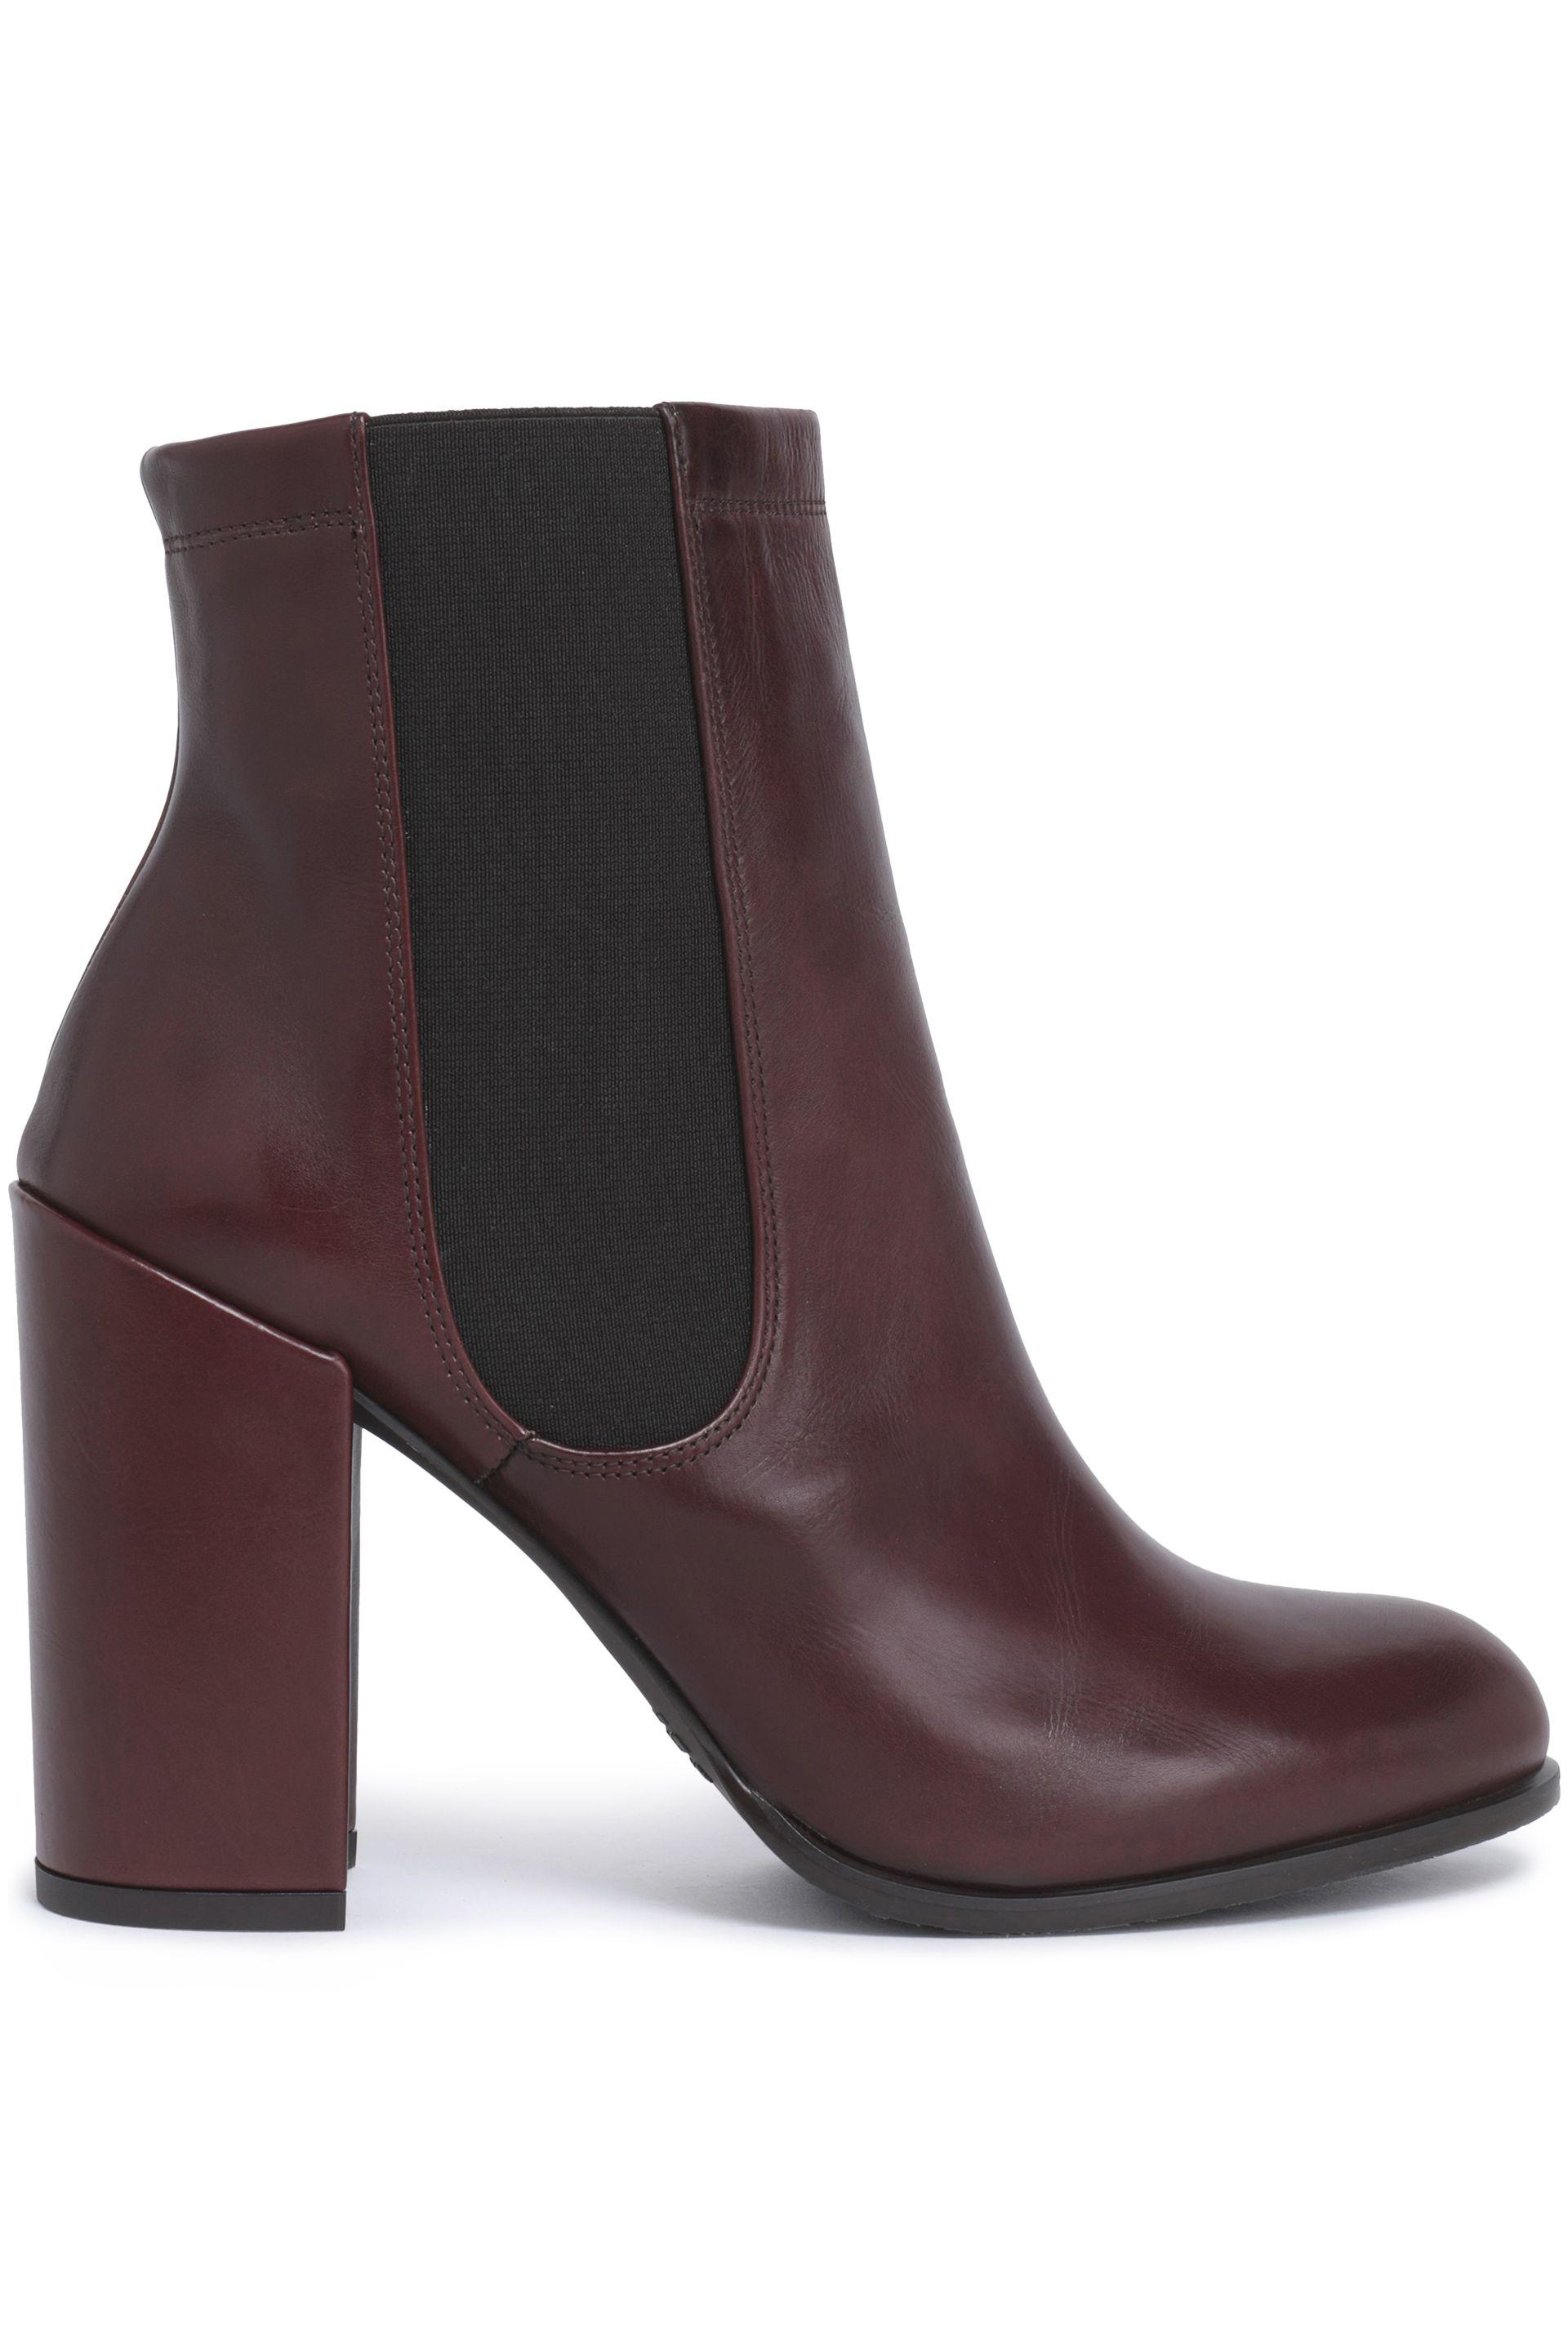 Lyst - Stuart Weitzman Leather Ankle Boots in Brown